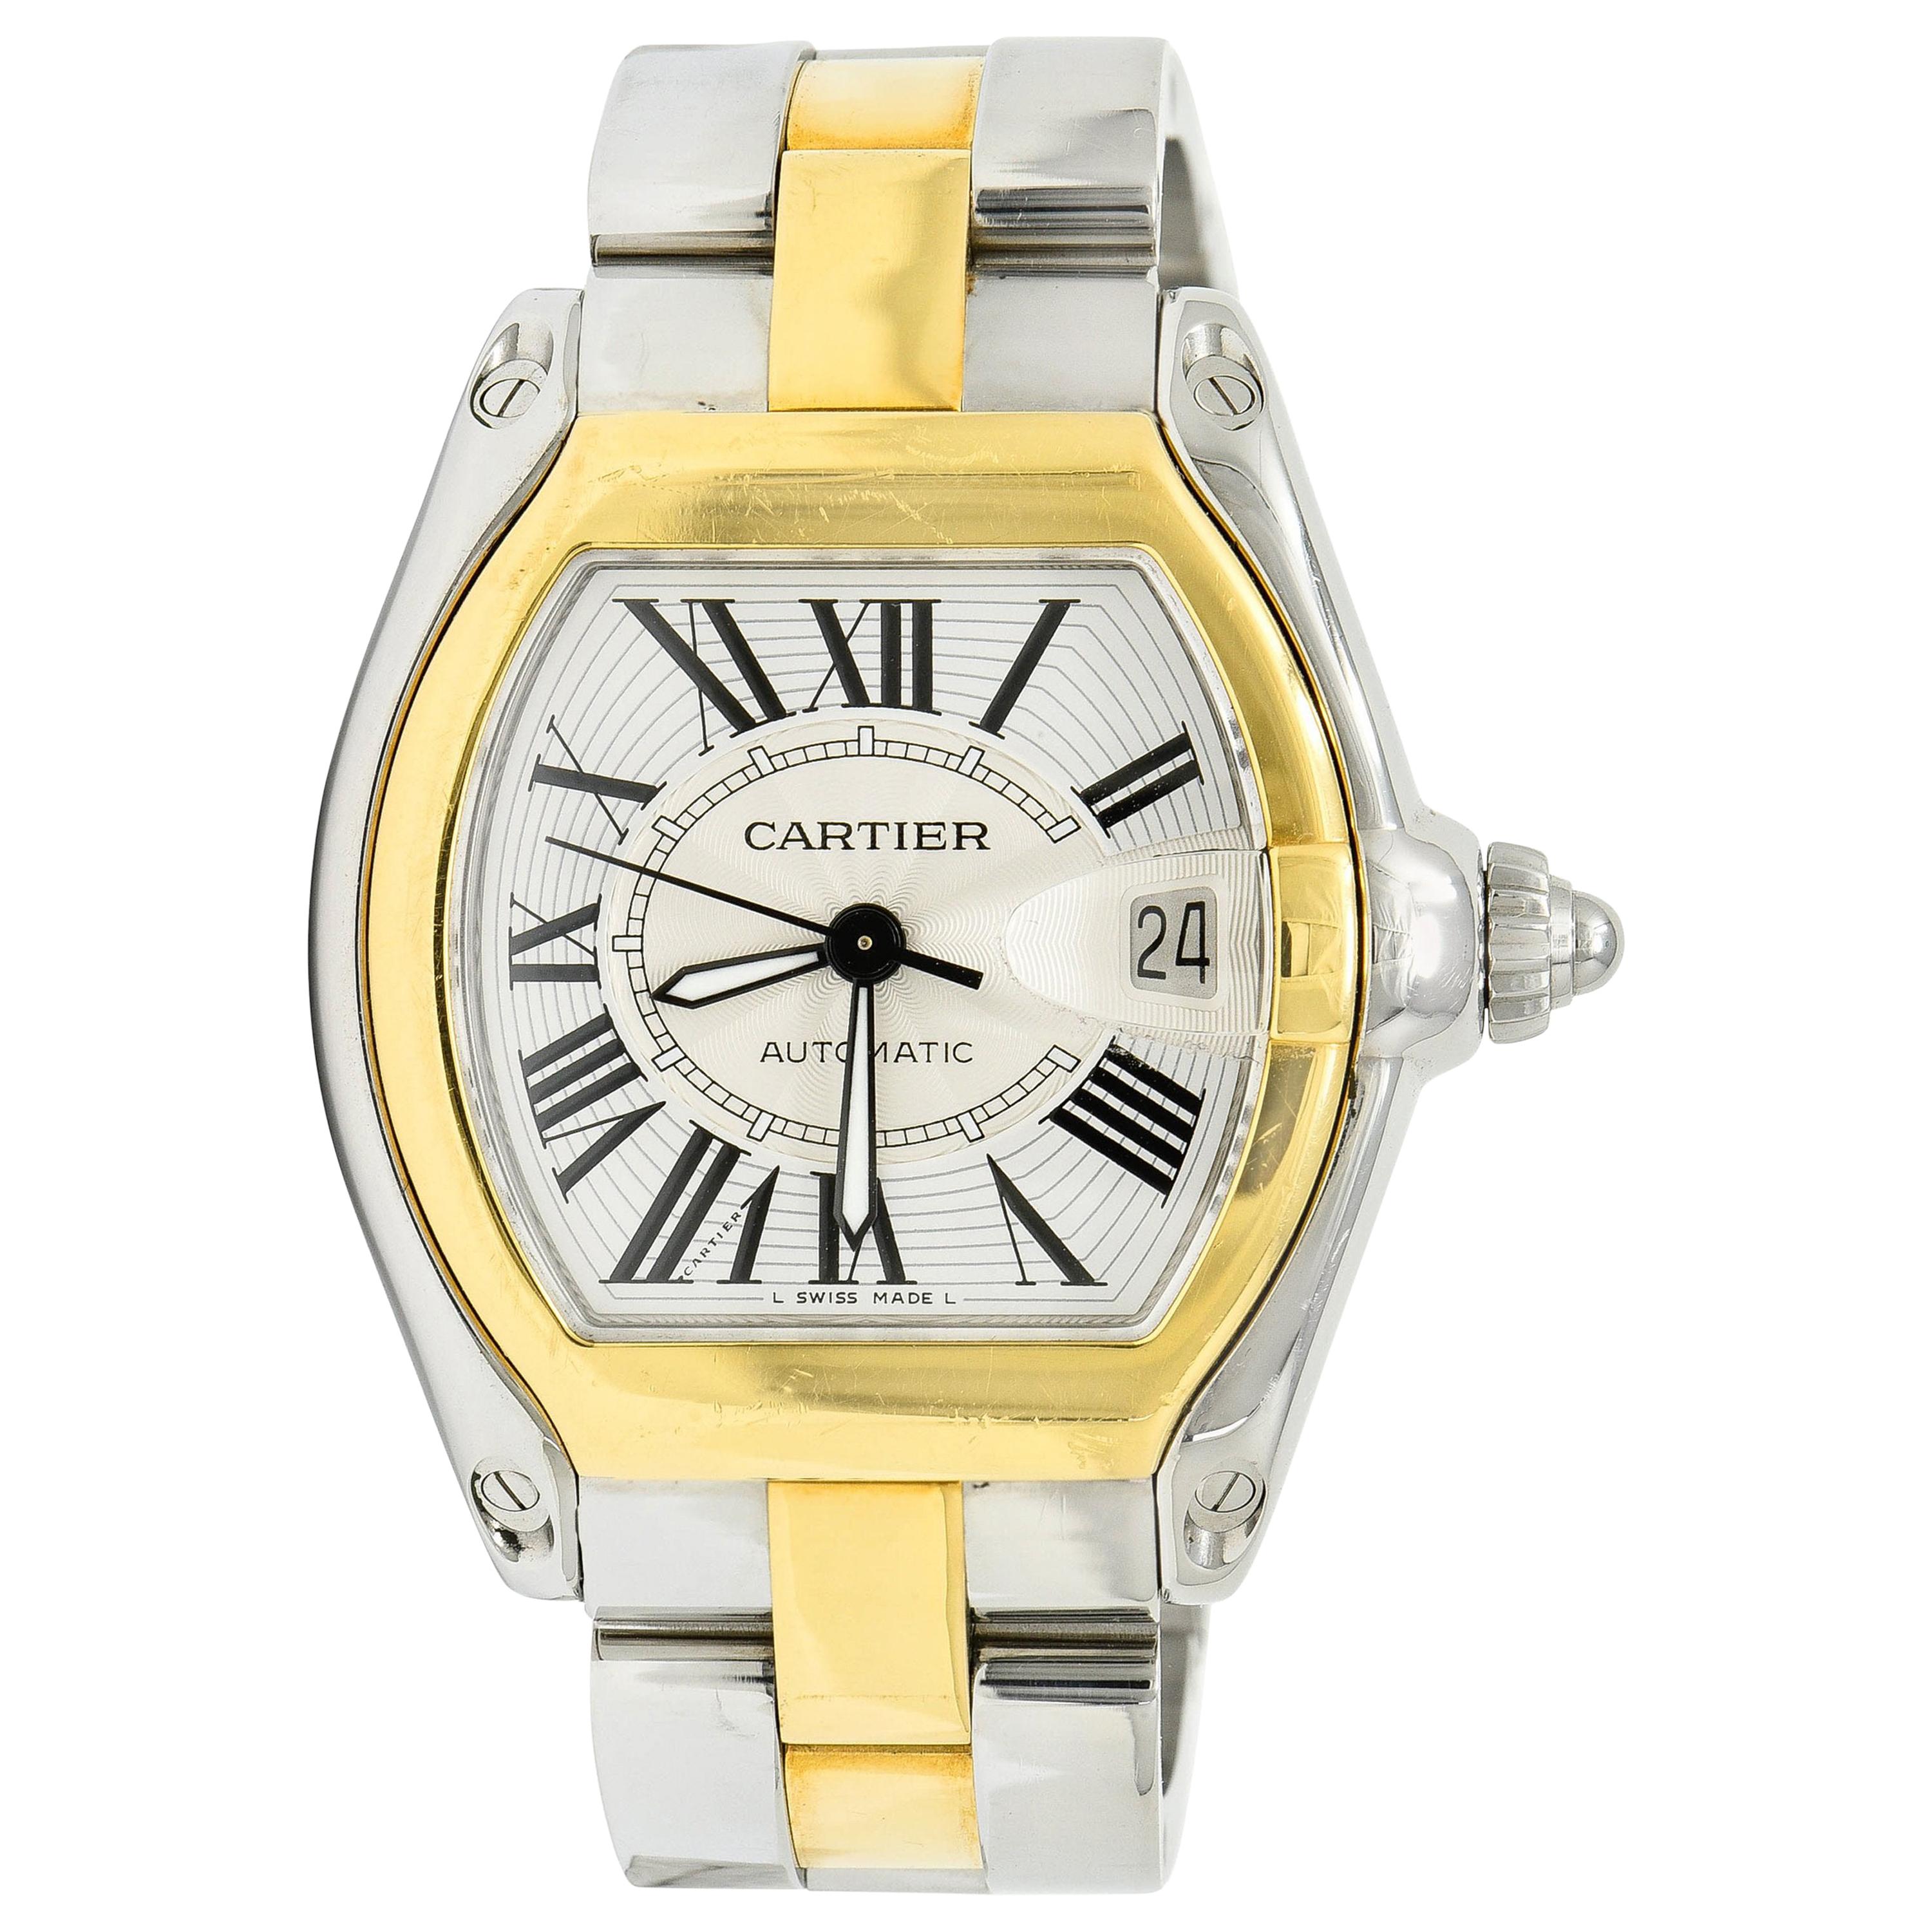 Cartier Roadster Unisex Large Two-Tone 18K Gold Automatic Men's Watch